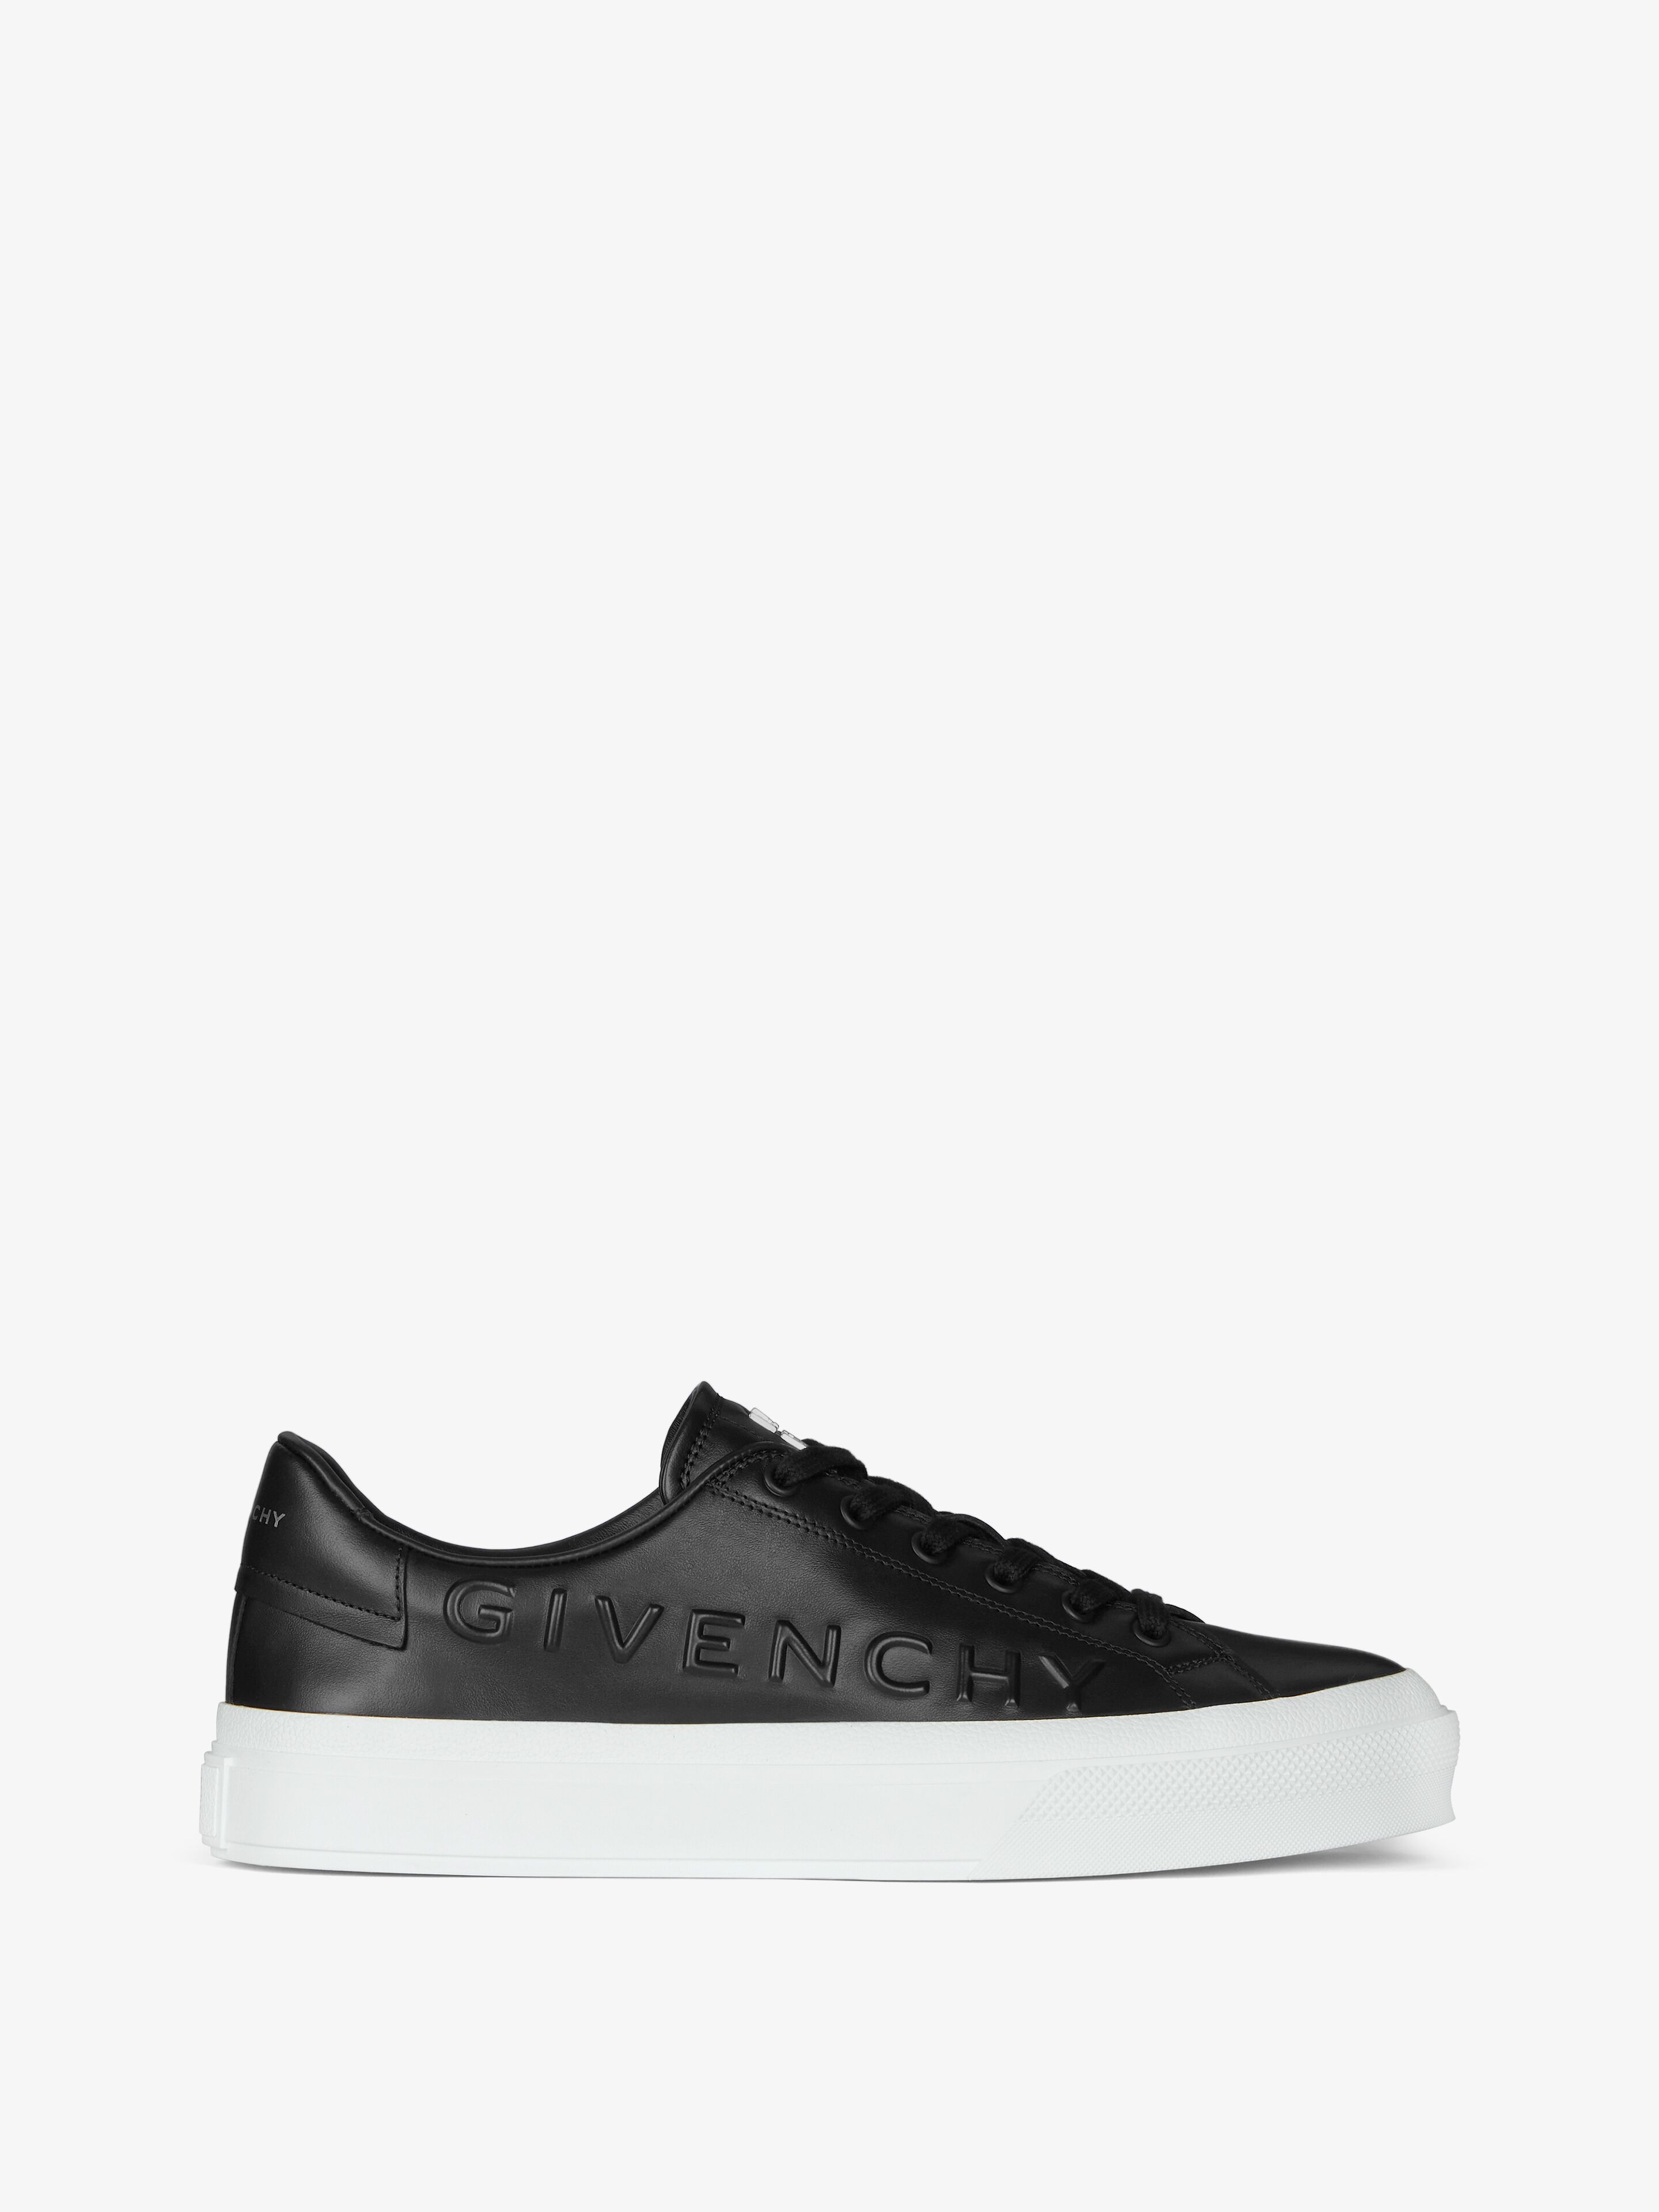 CITY SPORT SNEAKERS IN GIVENCHY LEATHER - 1